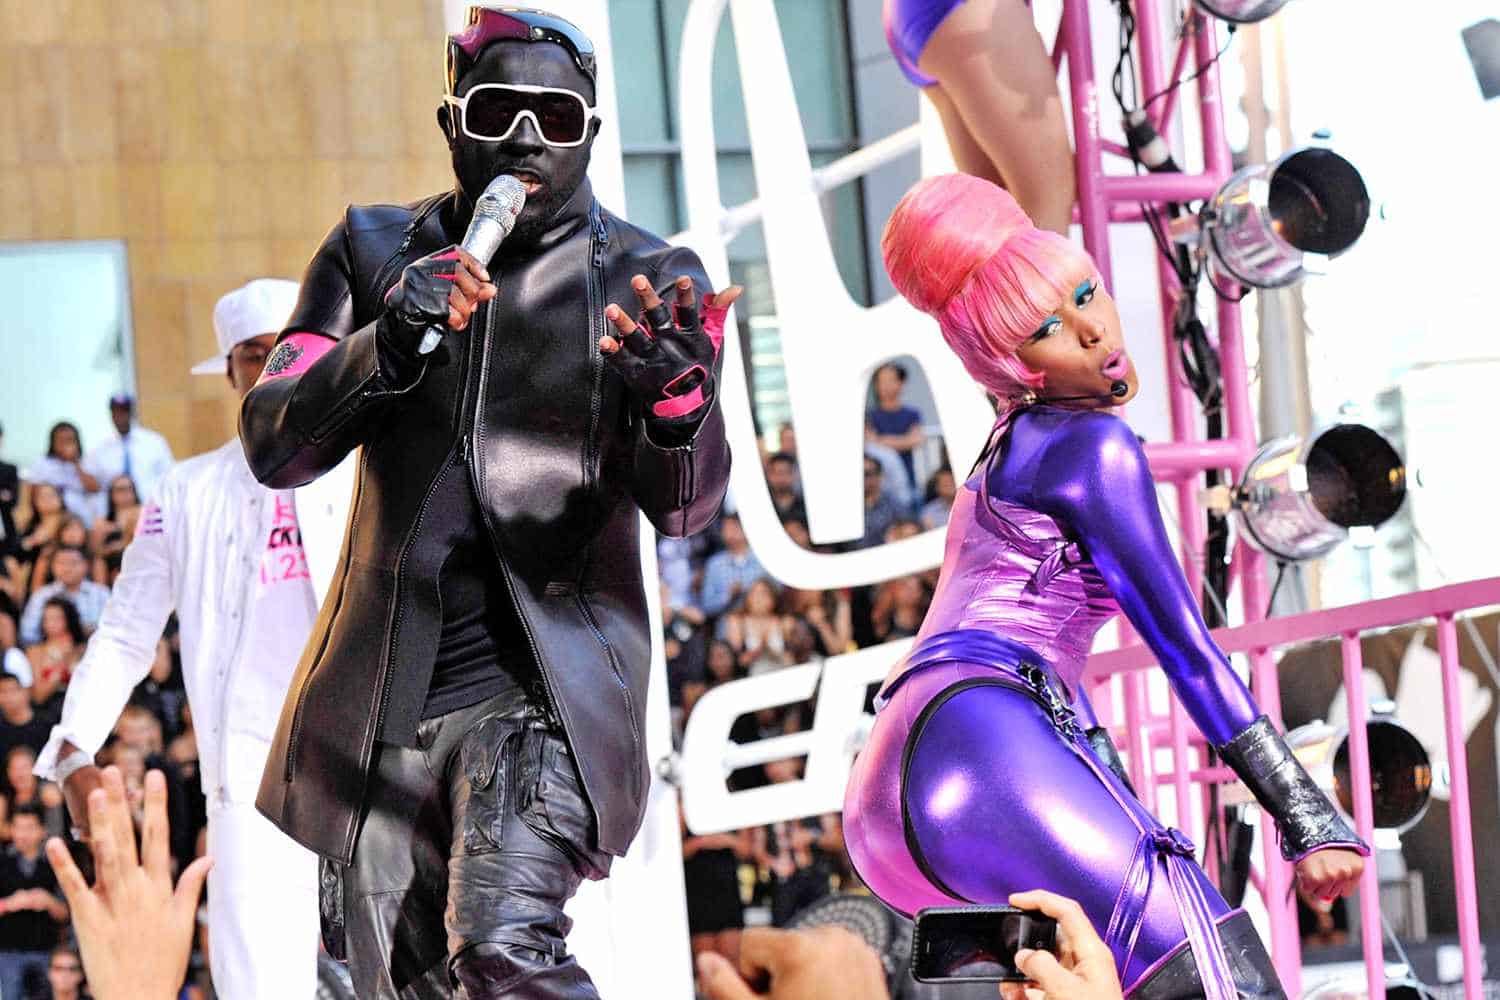 Will.i.am's performance with rapper Nicki Minaj which cause the Blackface controversy for the artist (Credits: People)